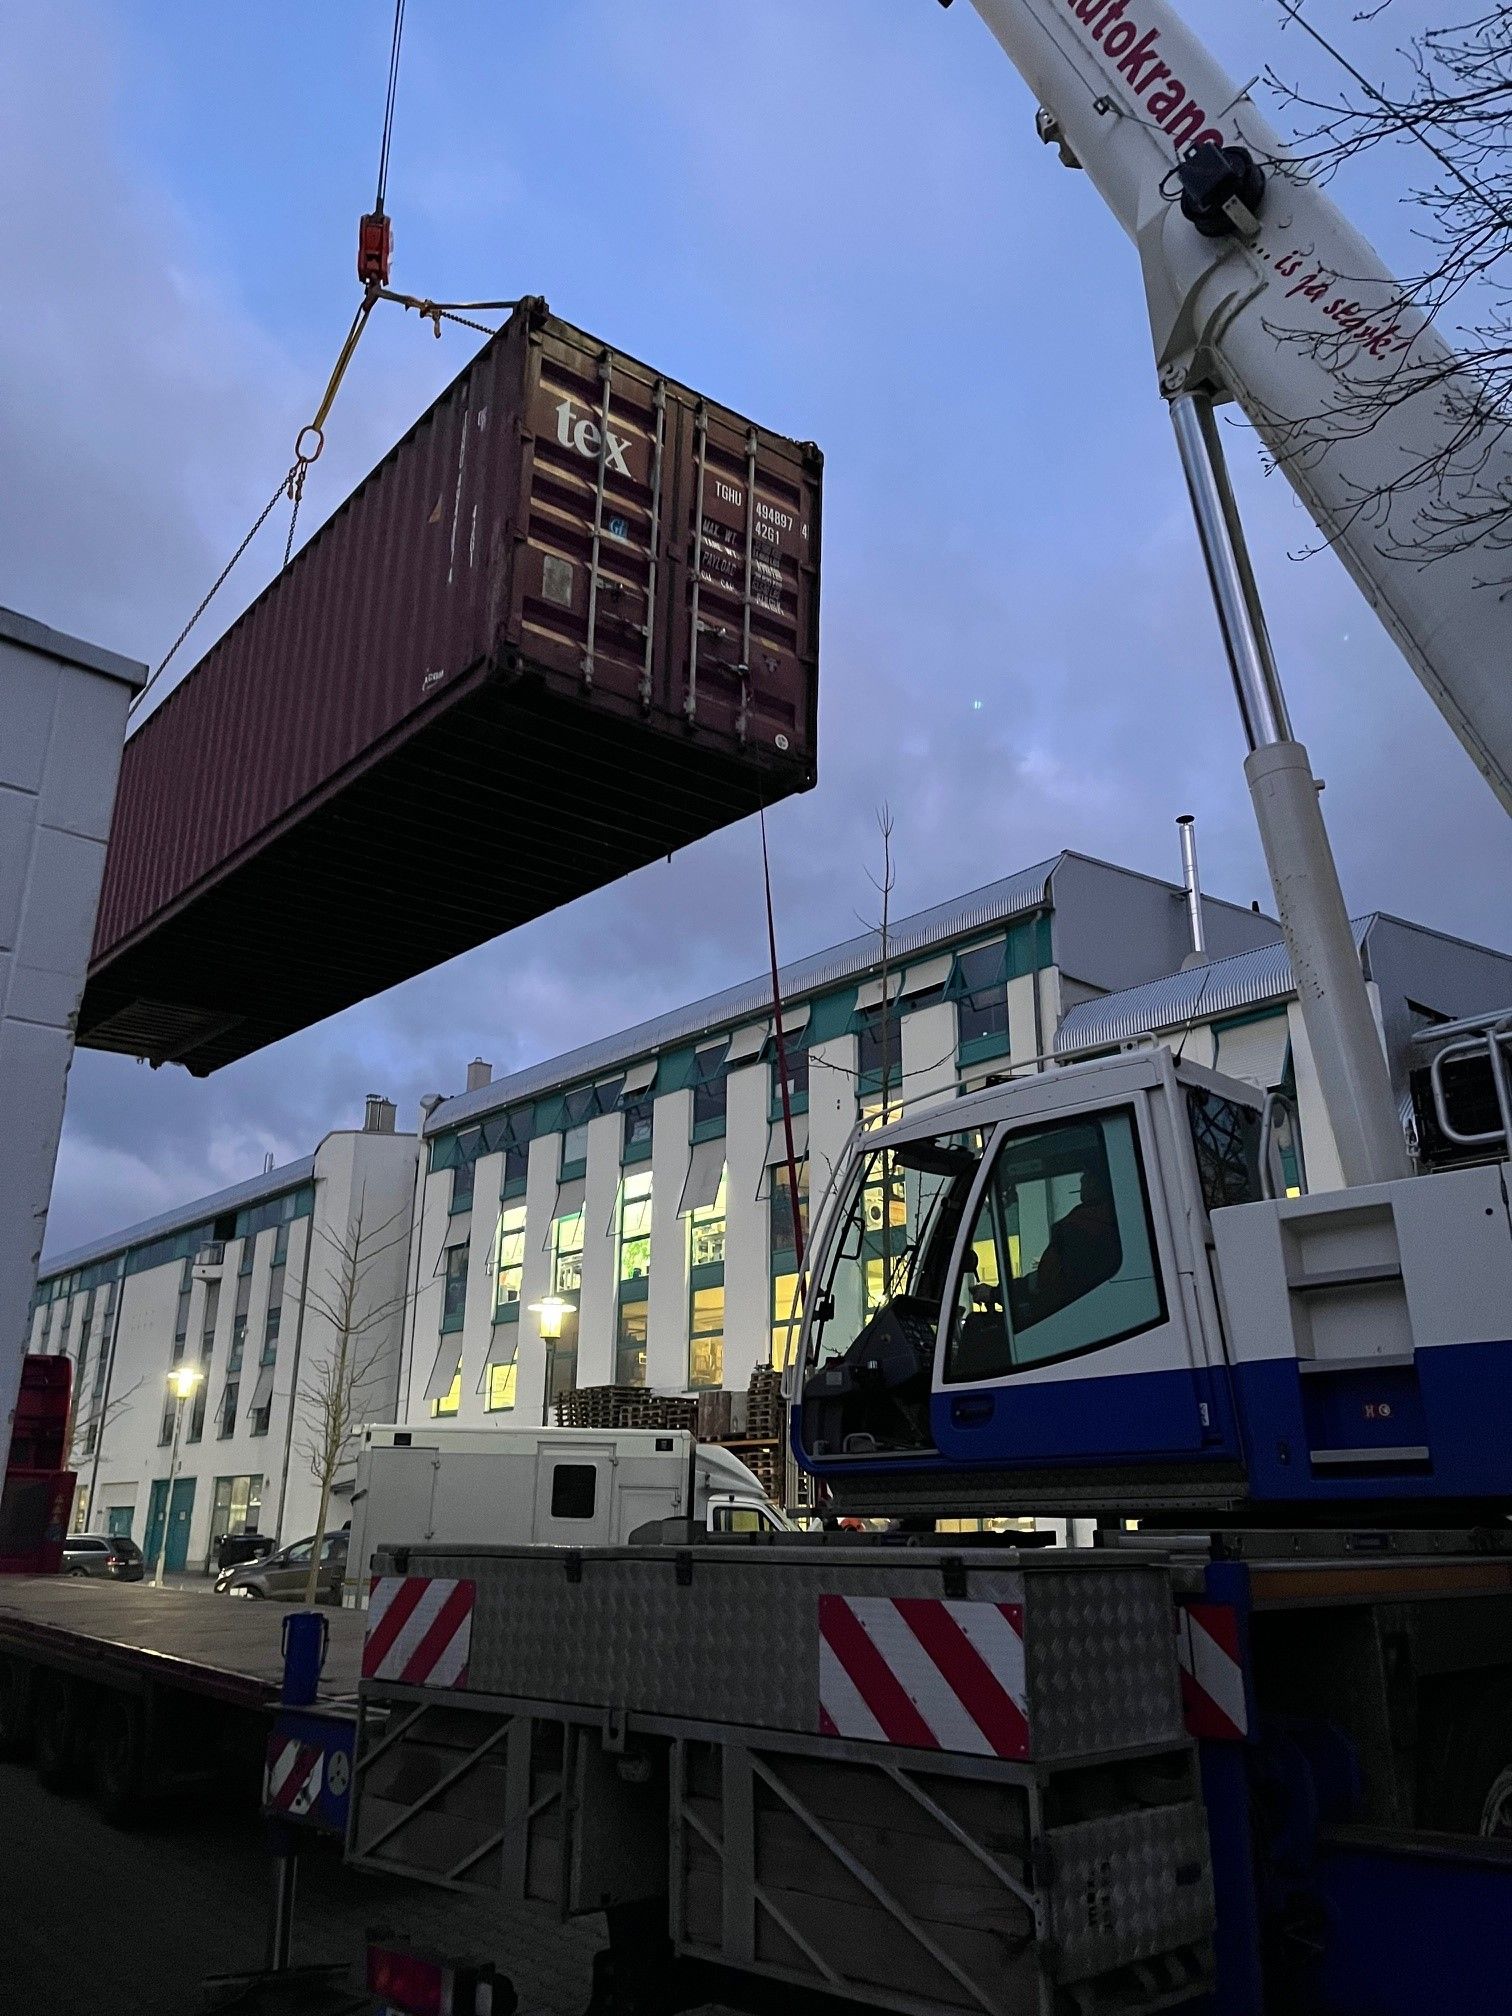 Mobile crane lifting 40 foot storage container